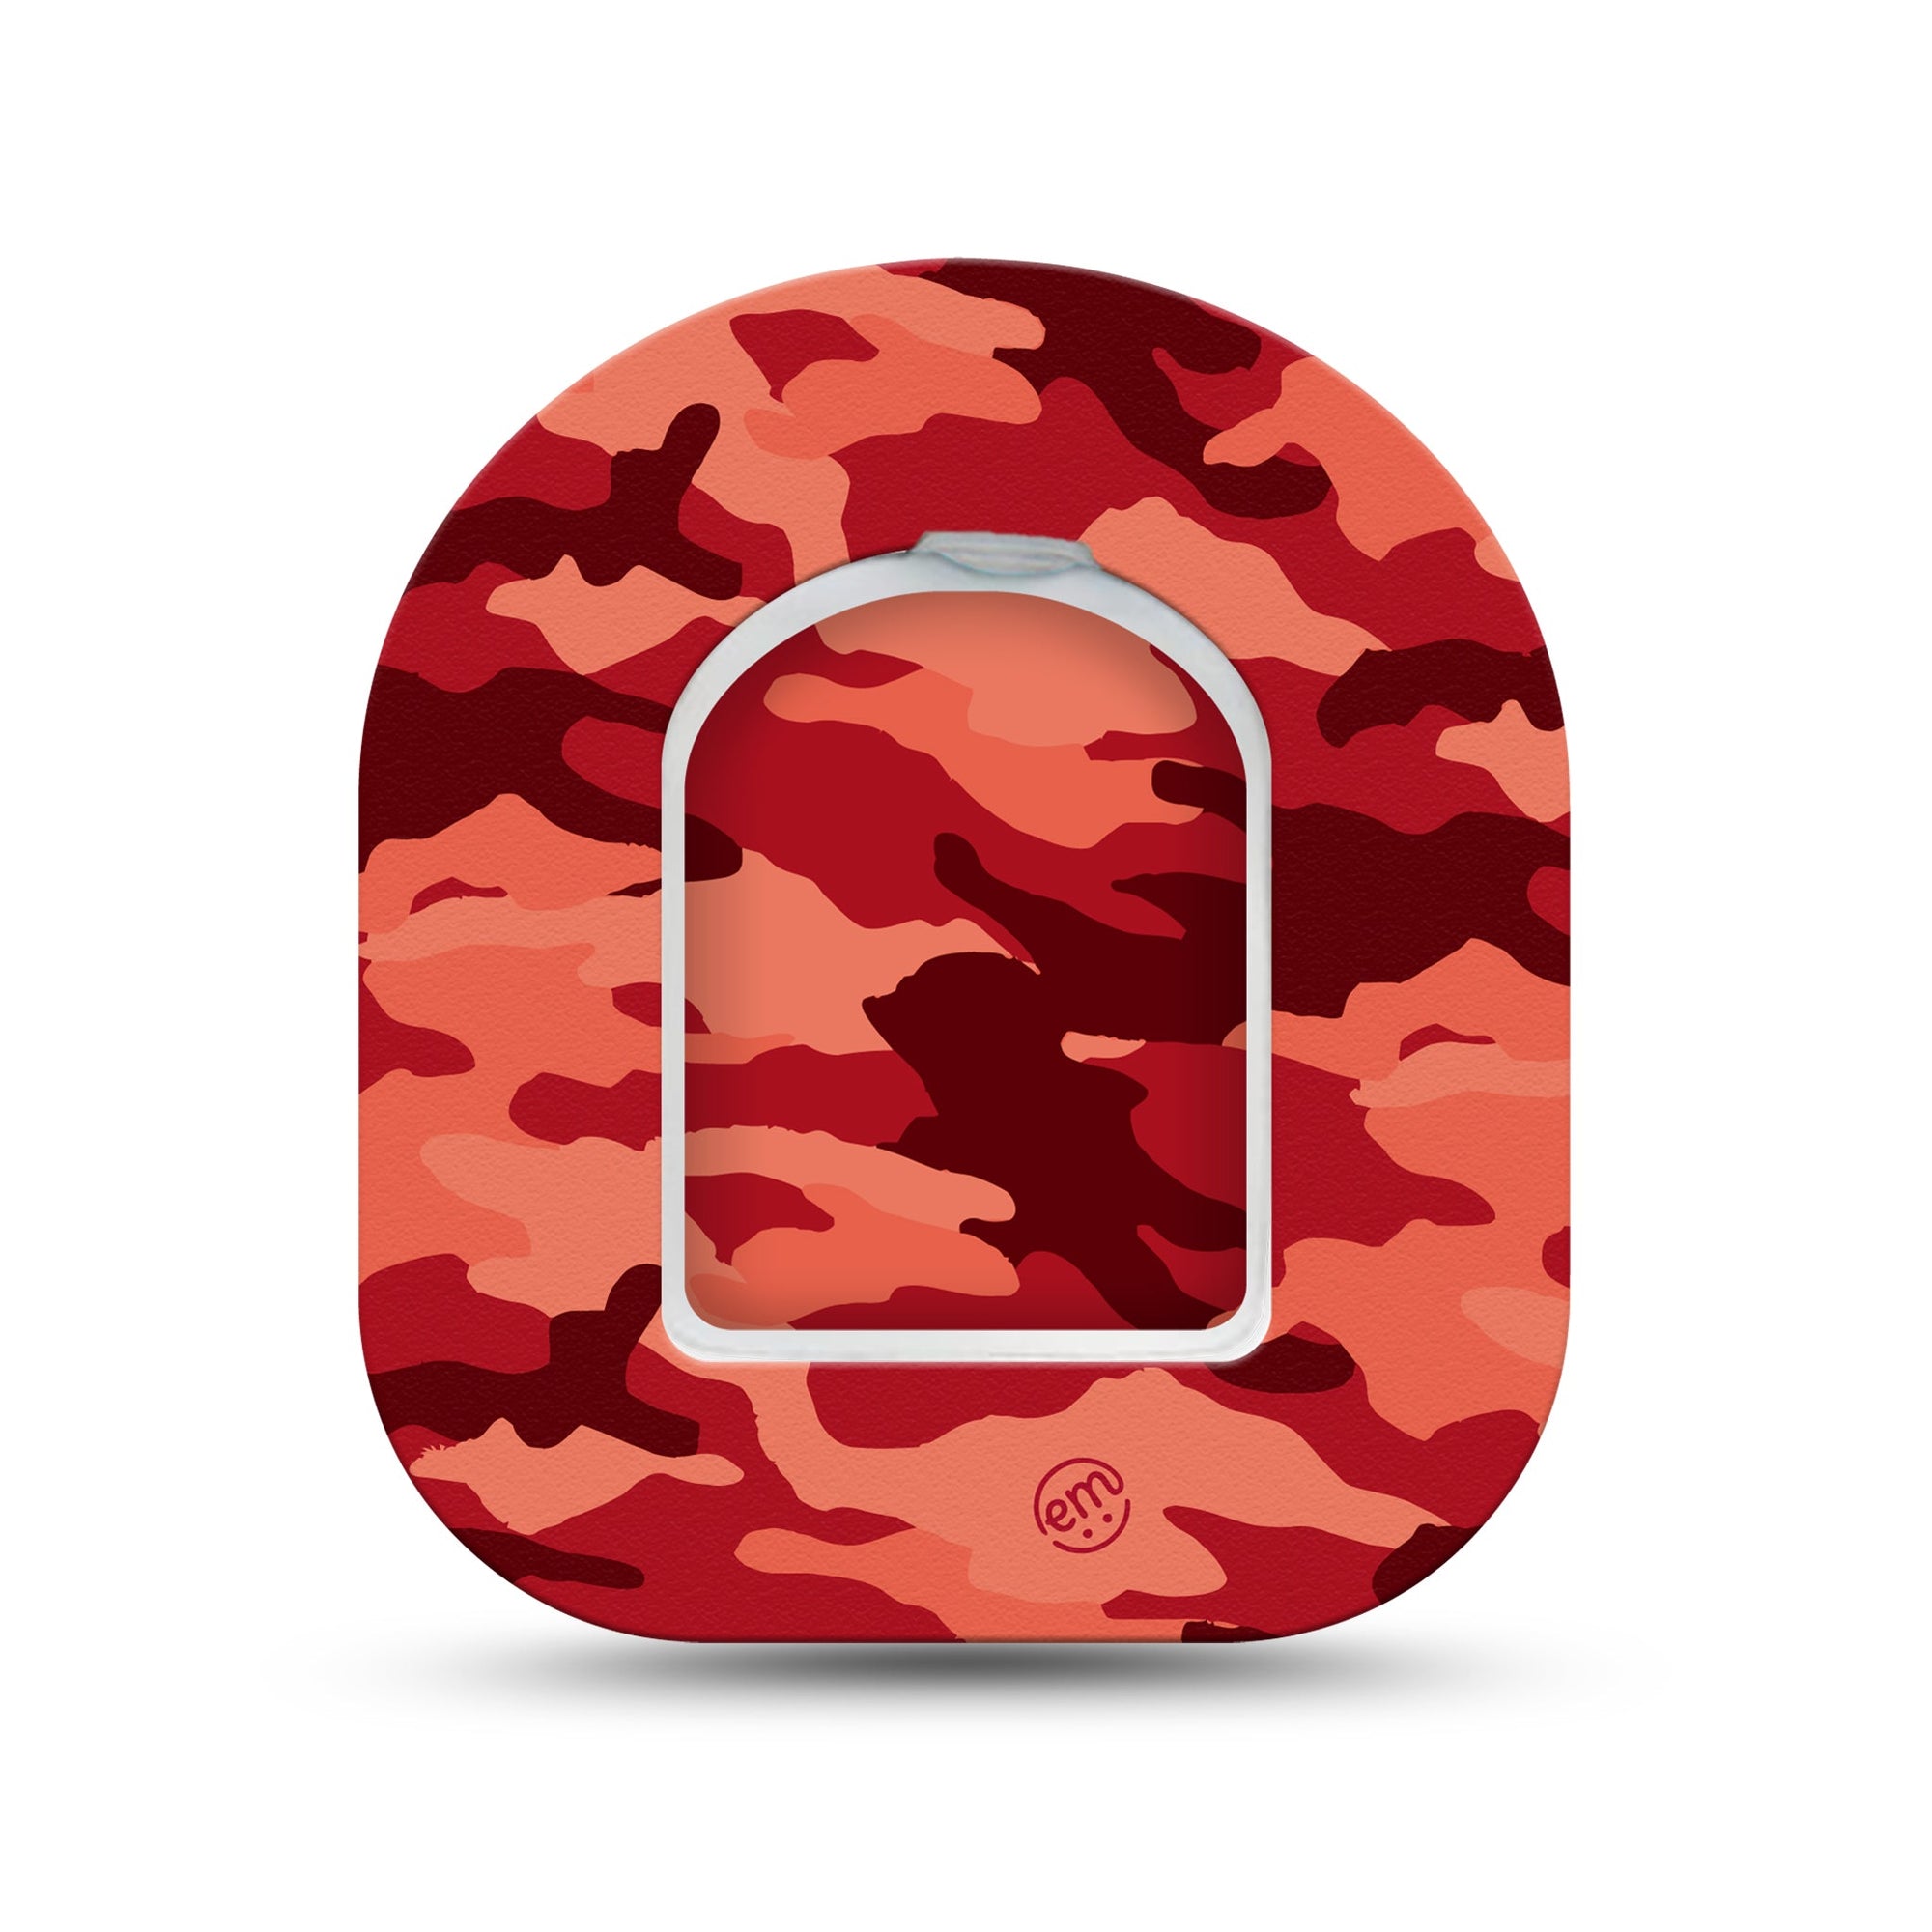 ExpressionMed Red Camo Pod Mini Tape Single Sticker and Single Tape, Vibrant Pattern Overlay Patch Pump Design